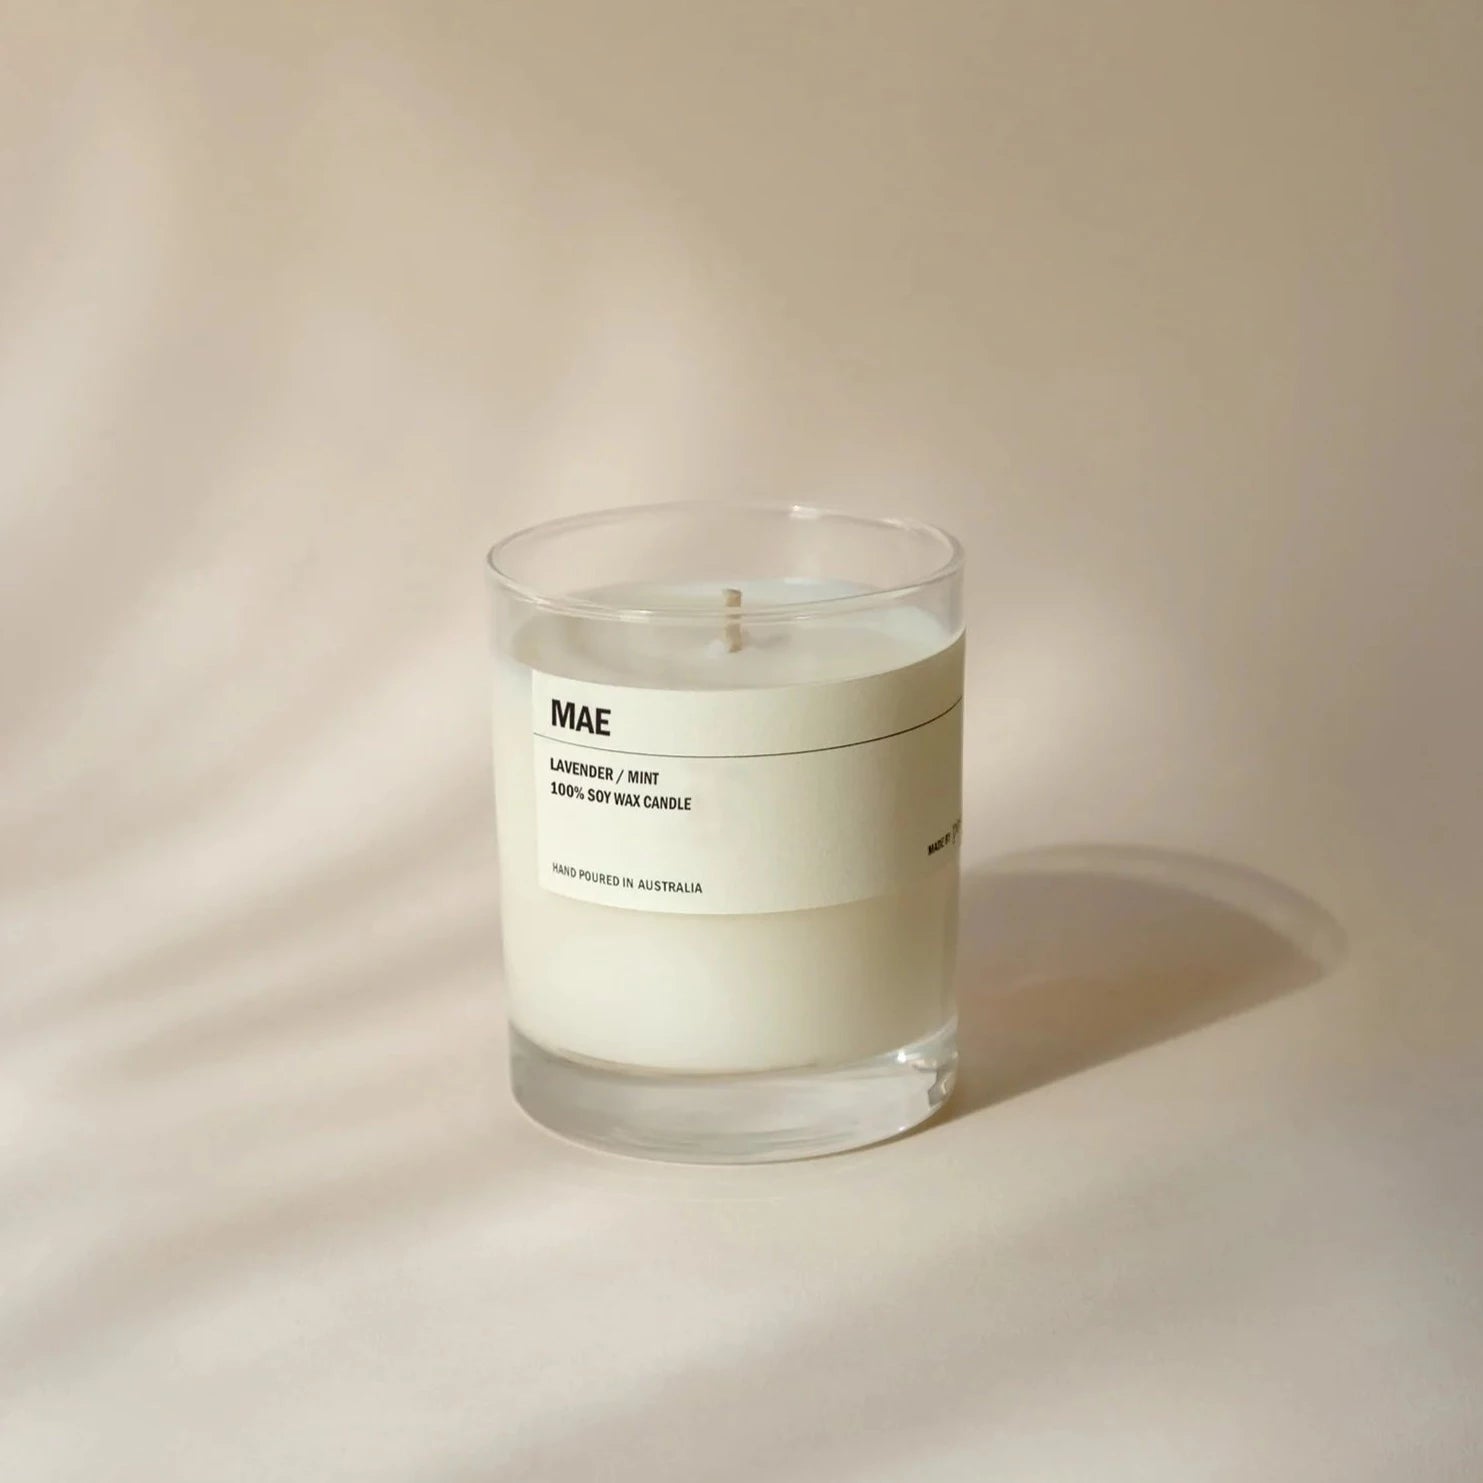 MAE Soy Wax Candle by Posie